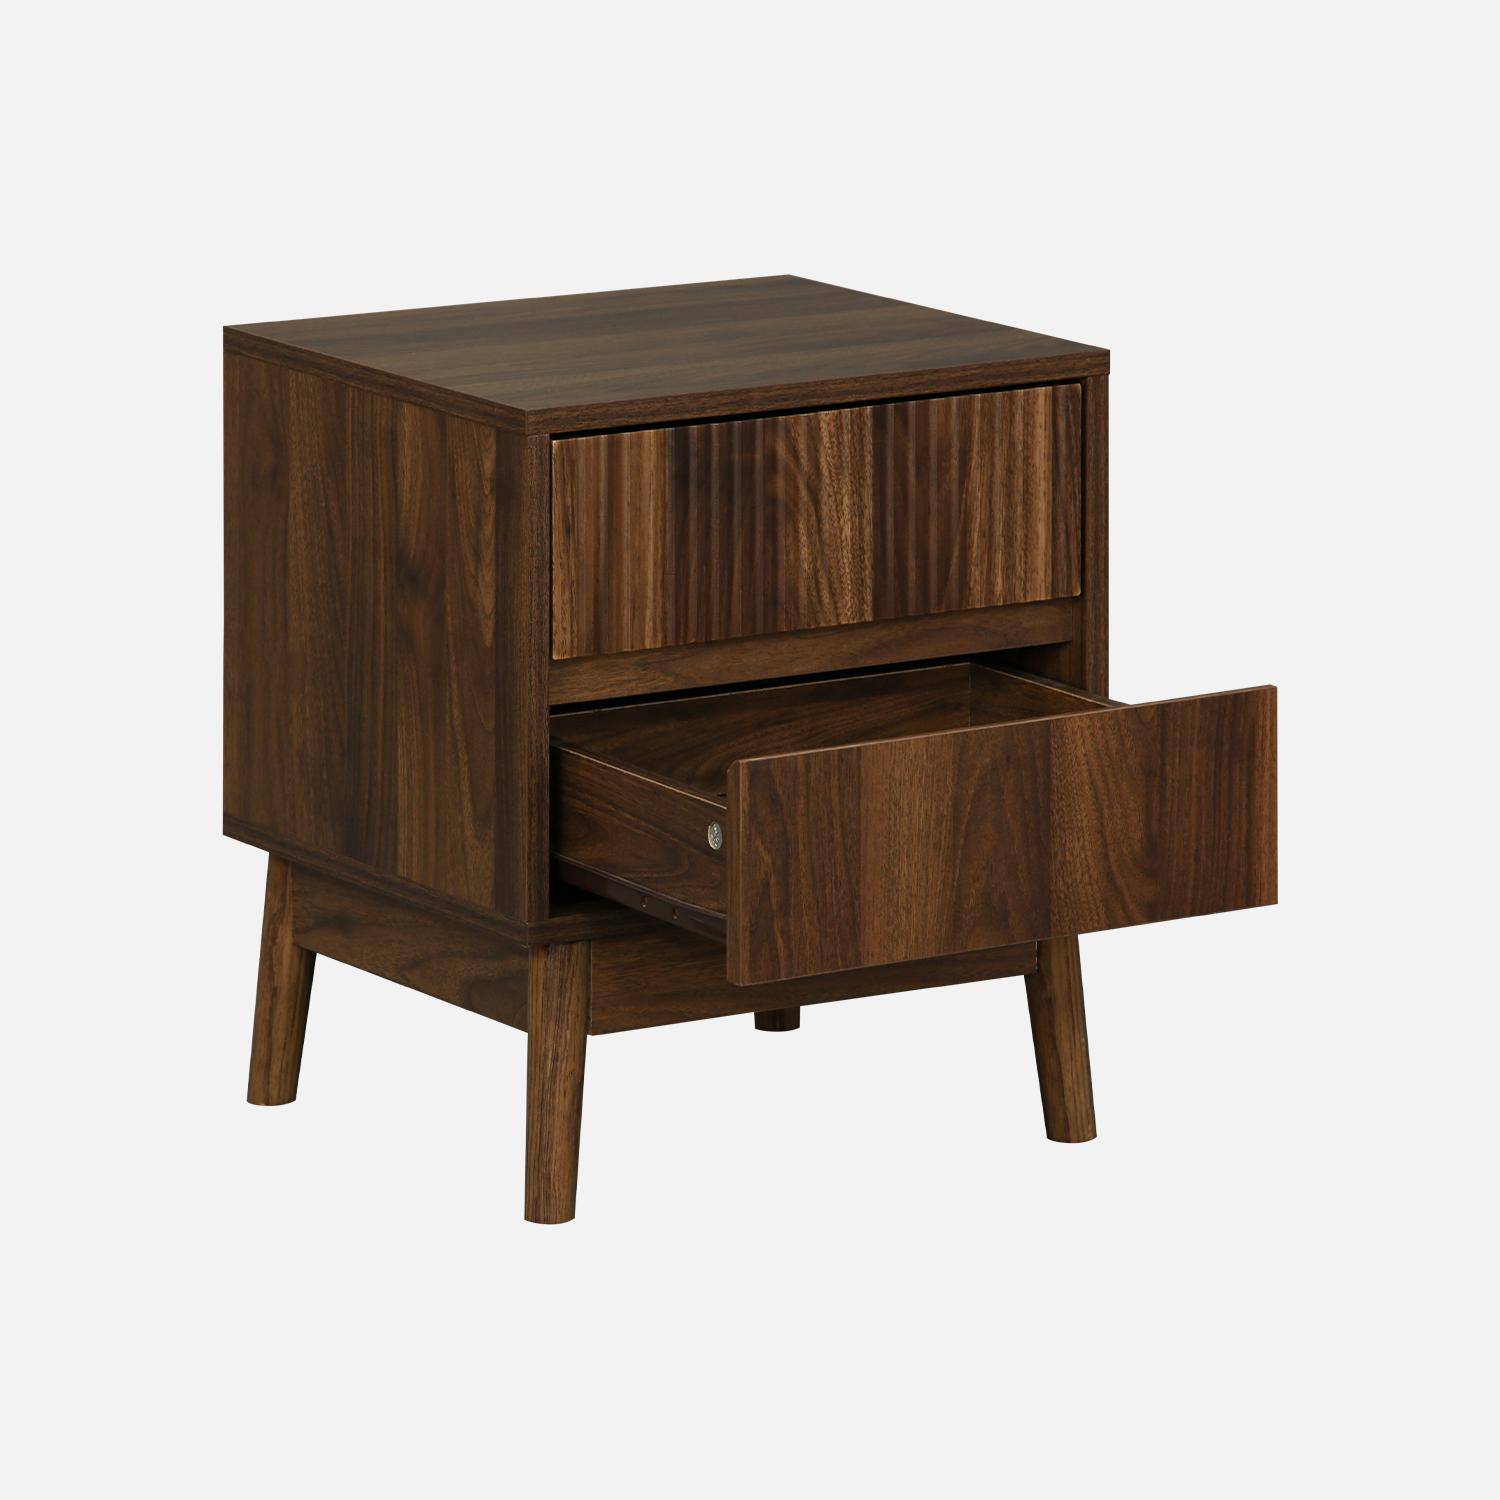 Pair of grooved wooden bedside tables with 2 drawers, 40x39x48cm - Linear - Dark Wood colour,sweeek,Photo6